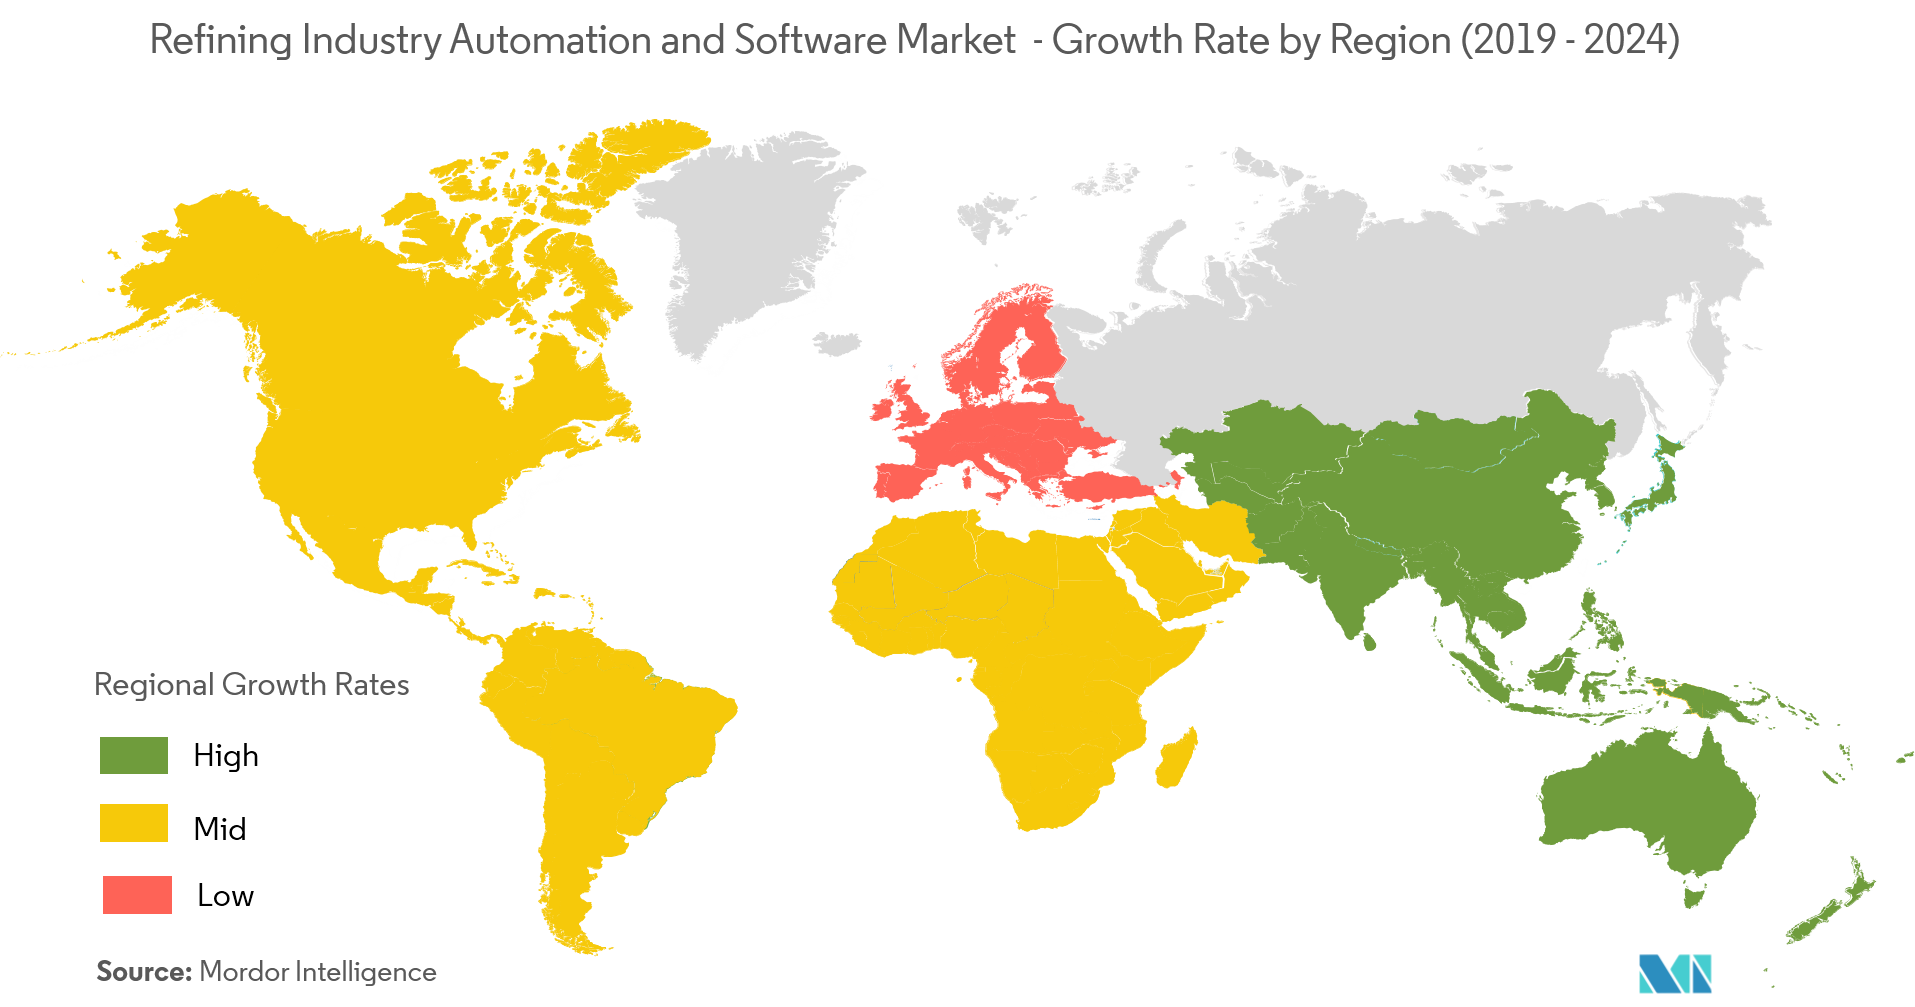 Refining Industry Automation and Software Market Growth